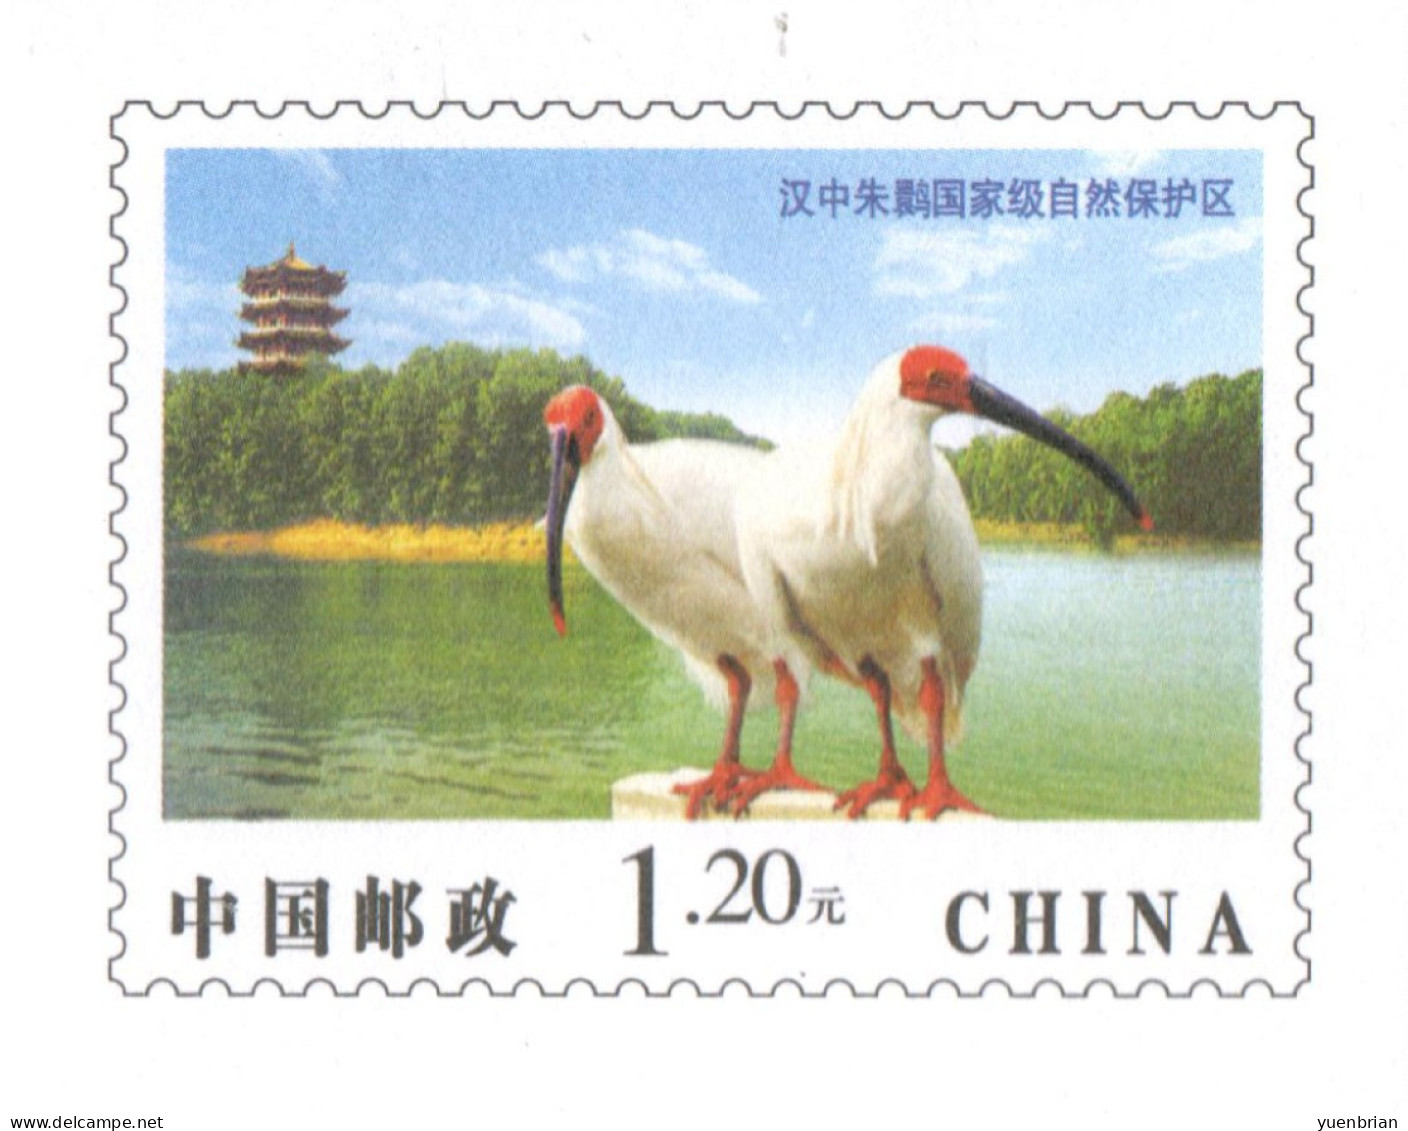 China 2009, Postal Stationary, Pre-Stamped Cover $1.20, Crane, MNH** - Cranes And Other Gruiformes